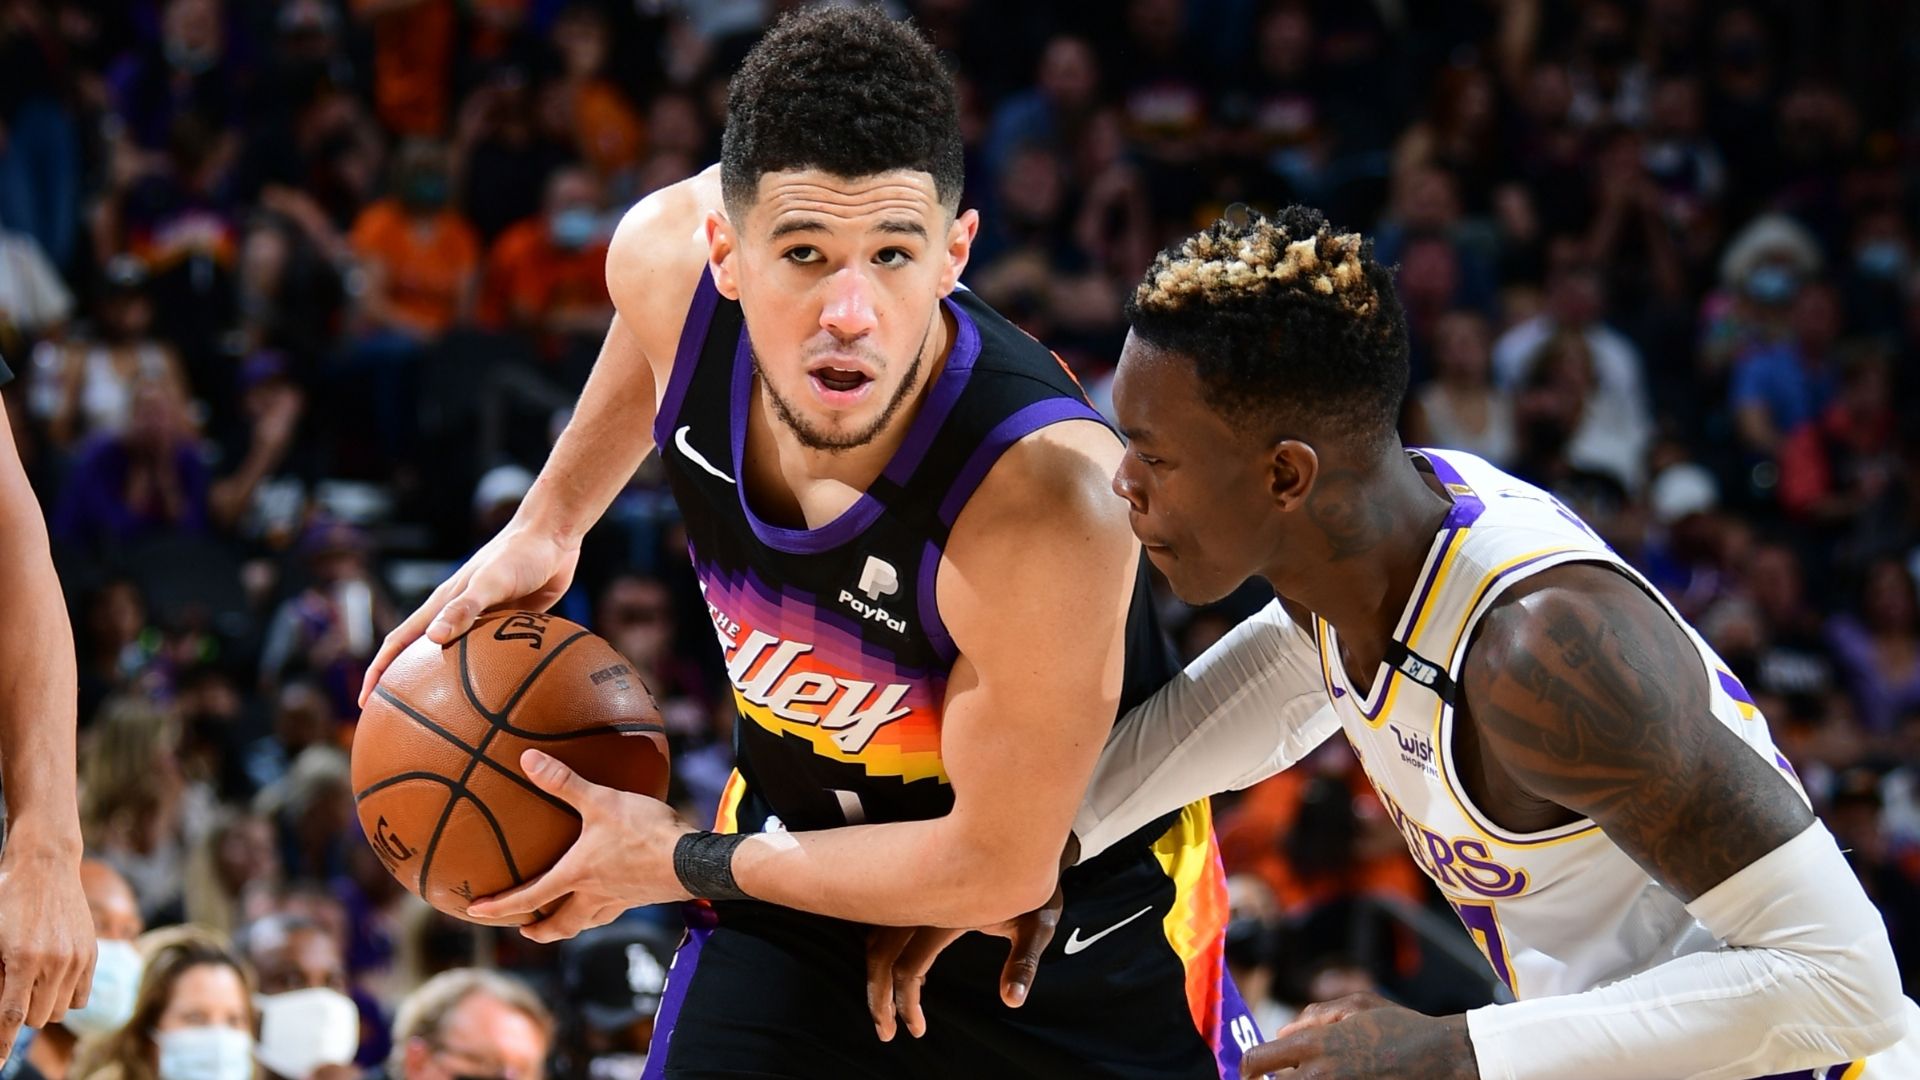 NBA Playoffs 2021: Devin Booker stars in playoff debut as Phoenix Suns handle Los Angeles Lakers. NBA.com India. The official site of